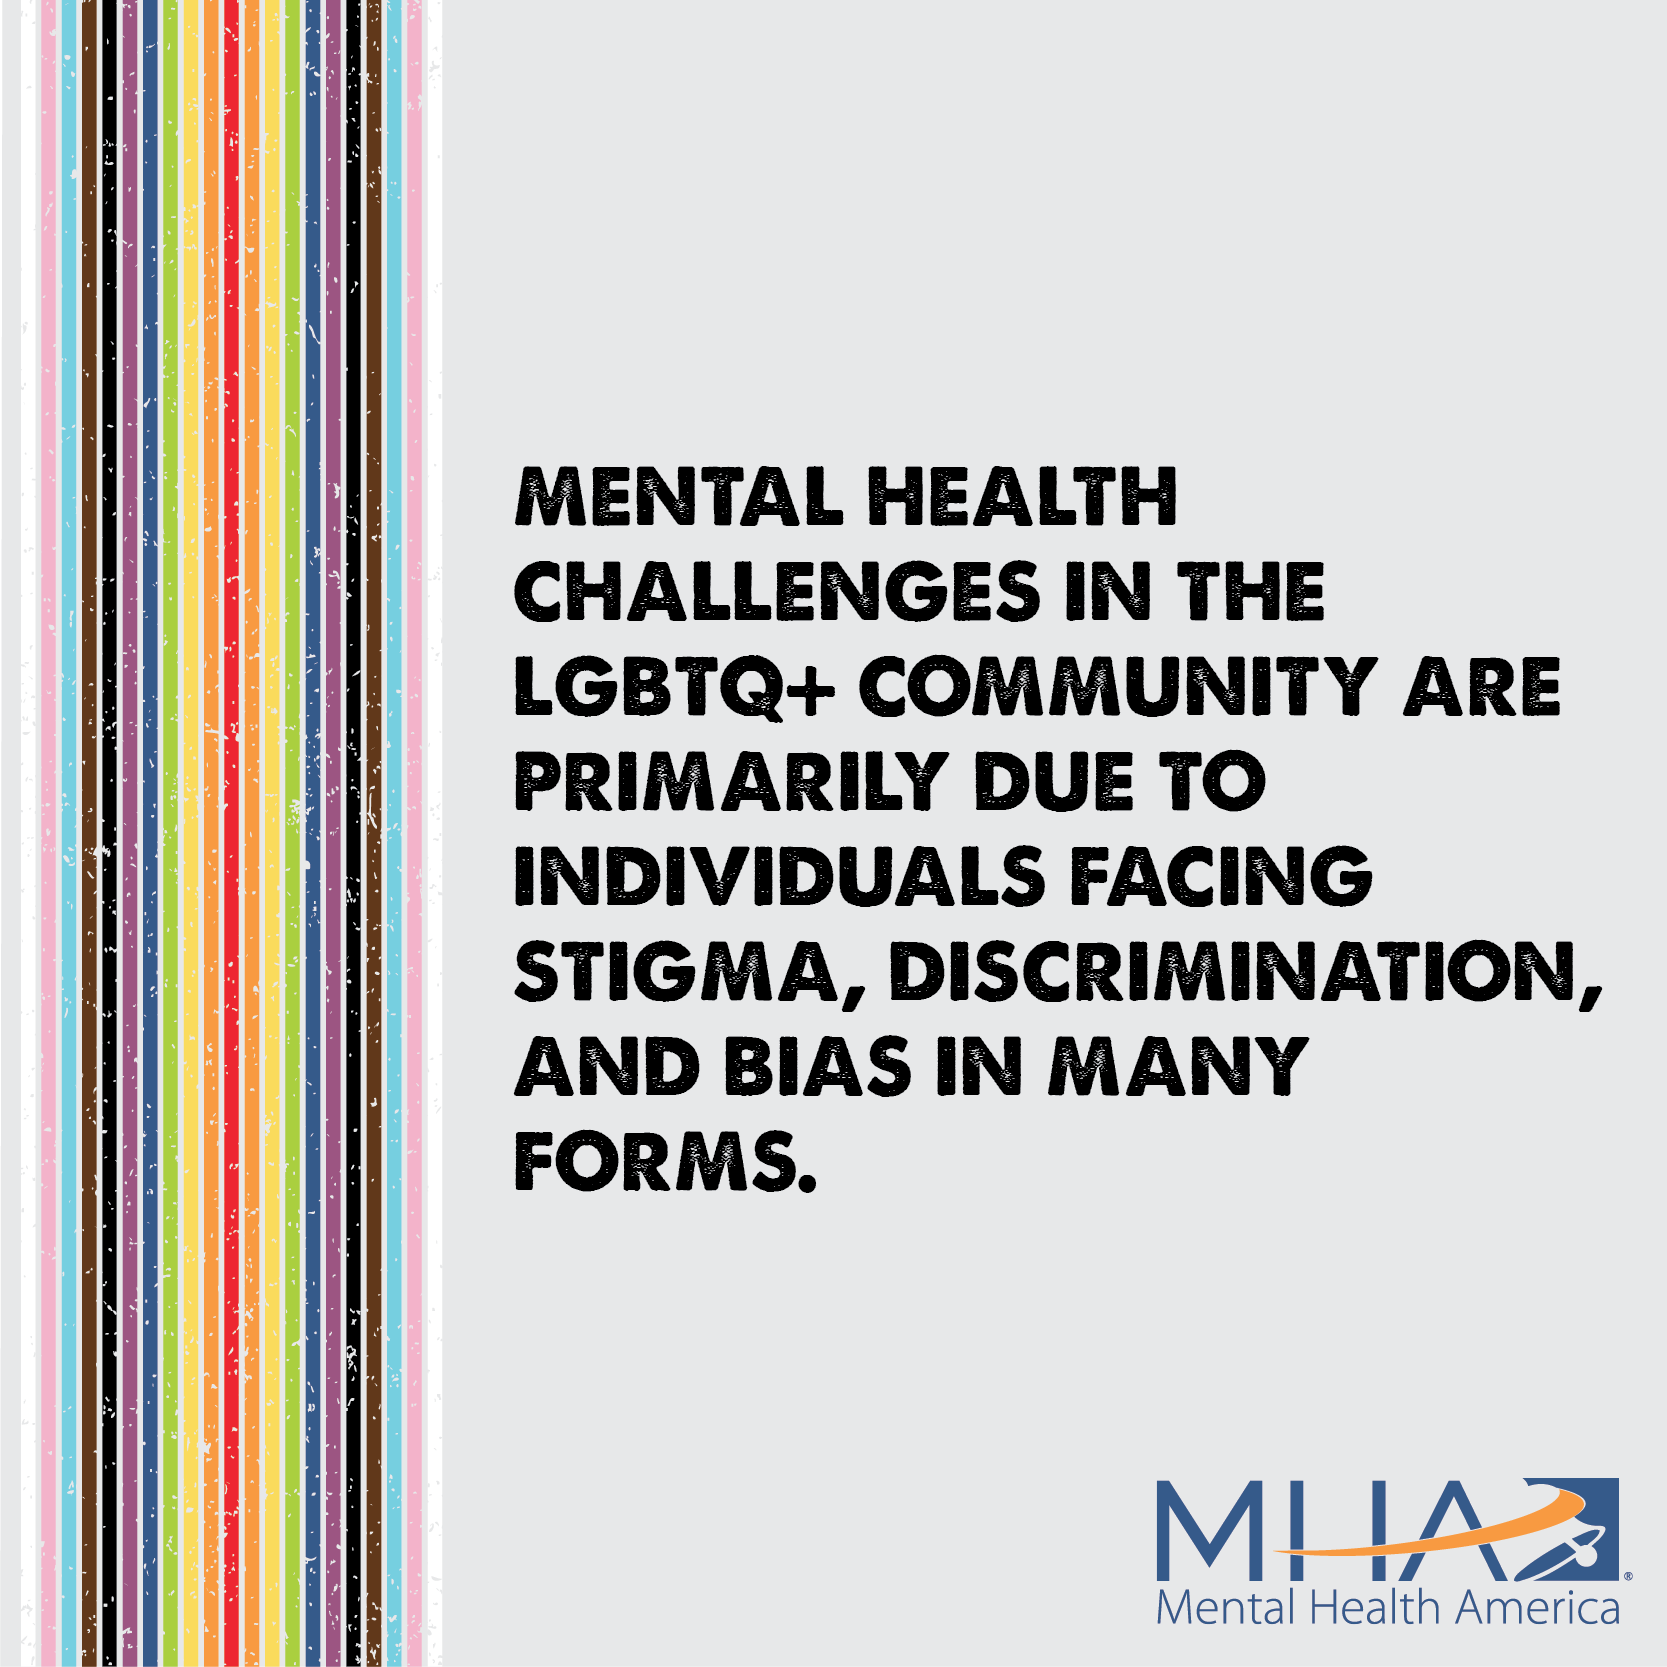 Mental health challenges in the LGBTQ+ community are primarily due to individuals facing stigma, discrimination, and bias in many forms.